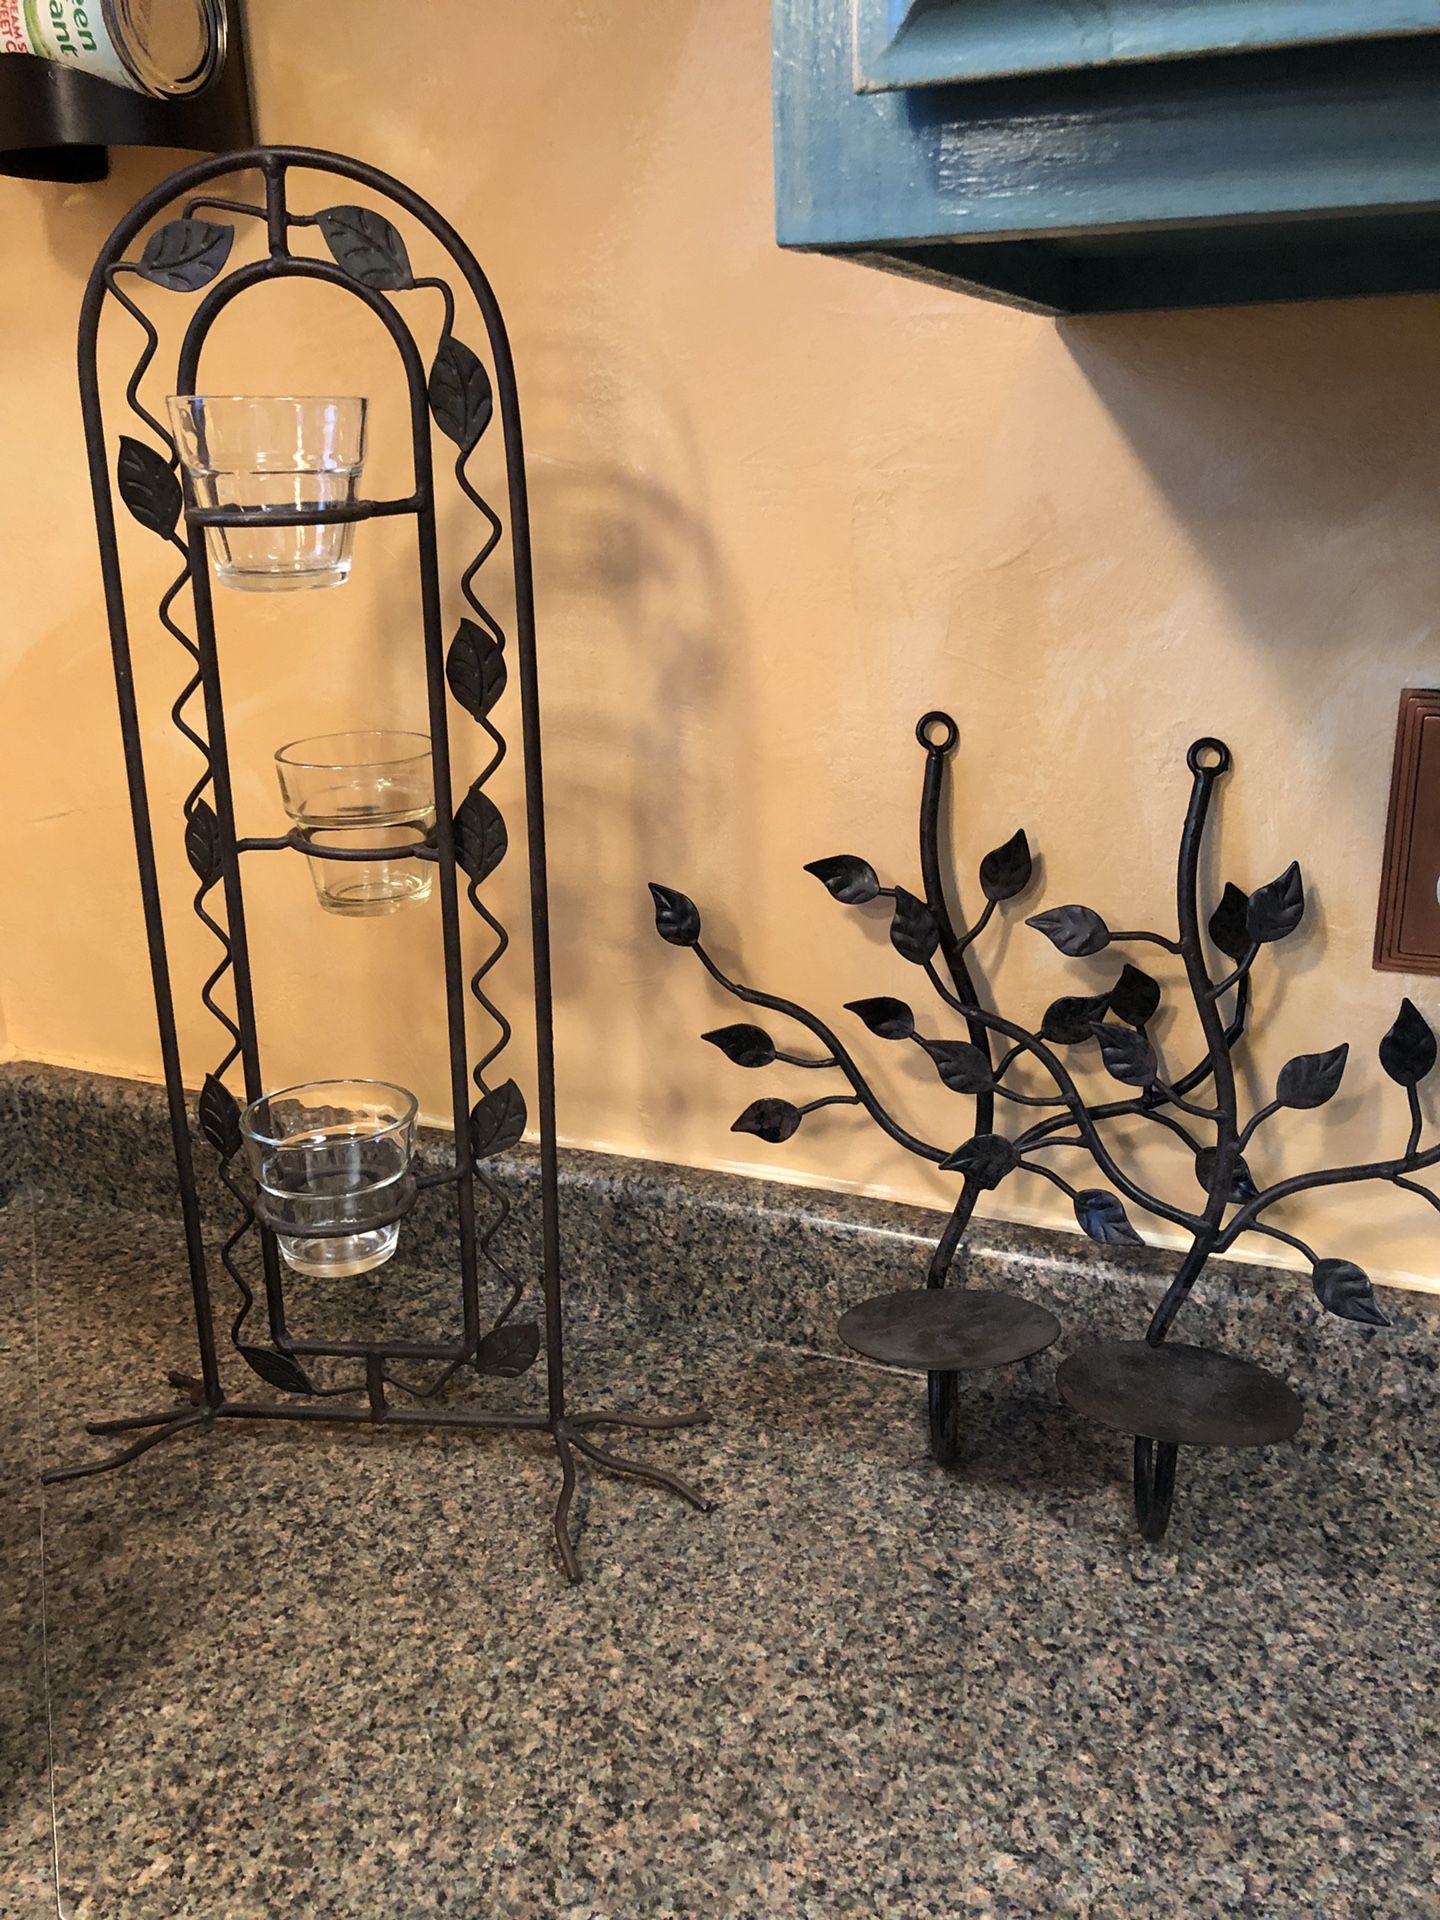 Pair of wall sconces and votive candle holder.